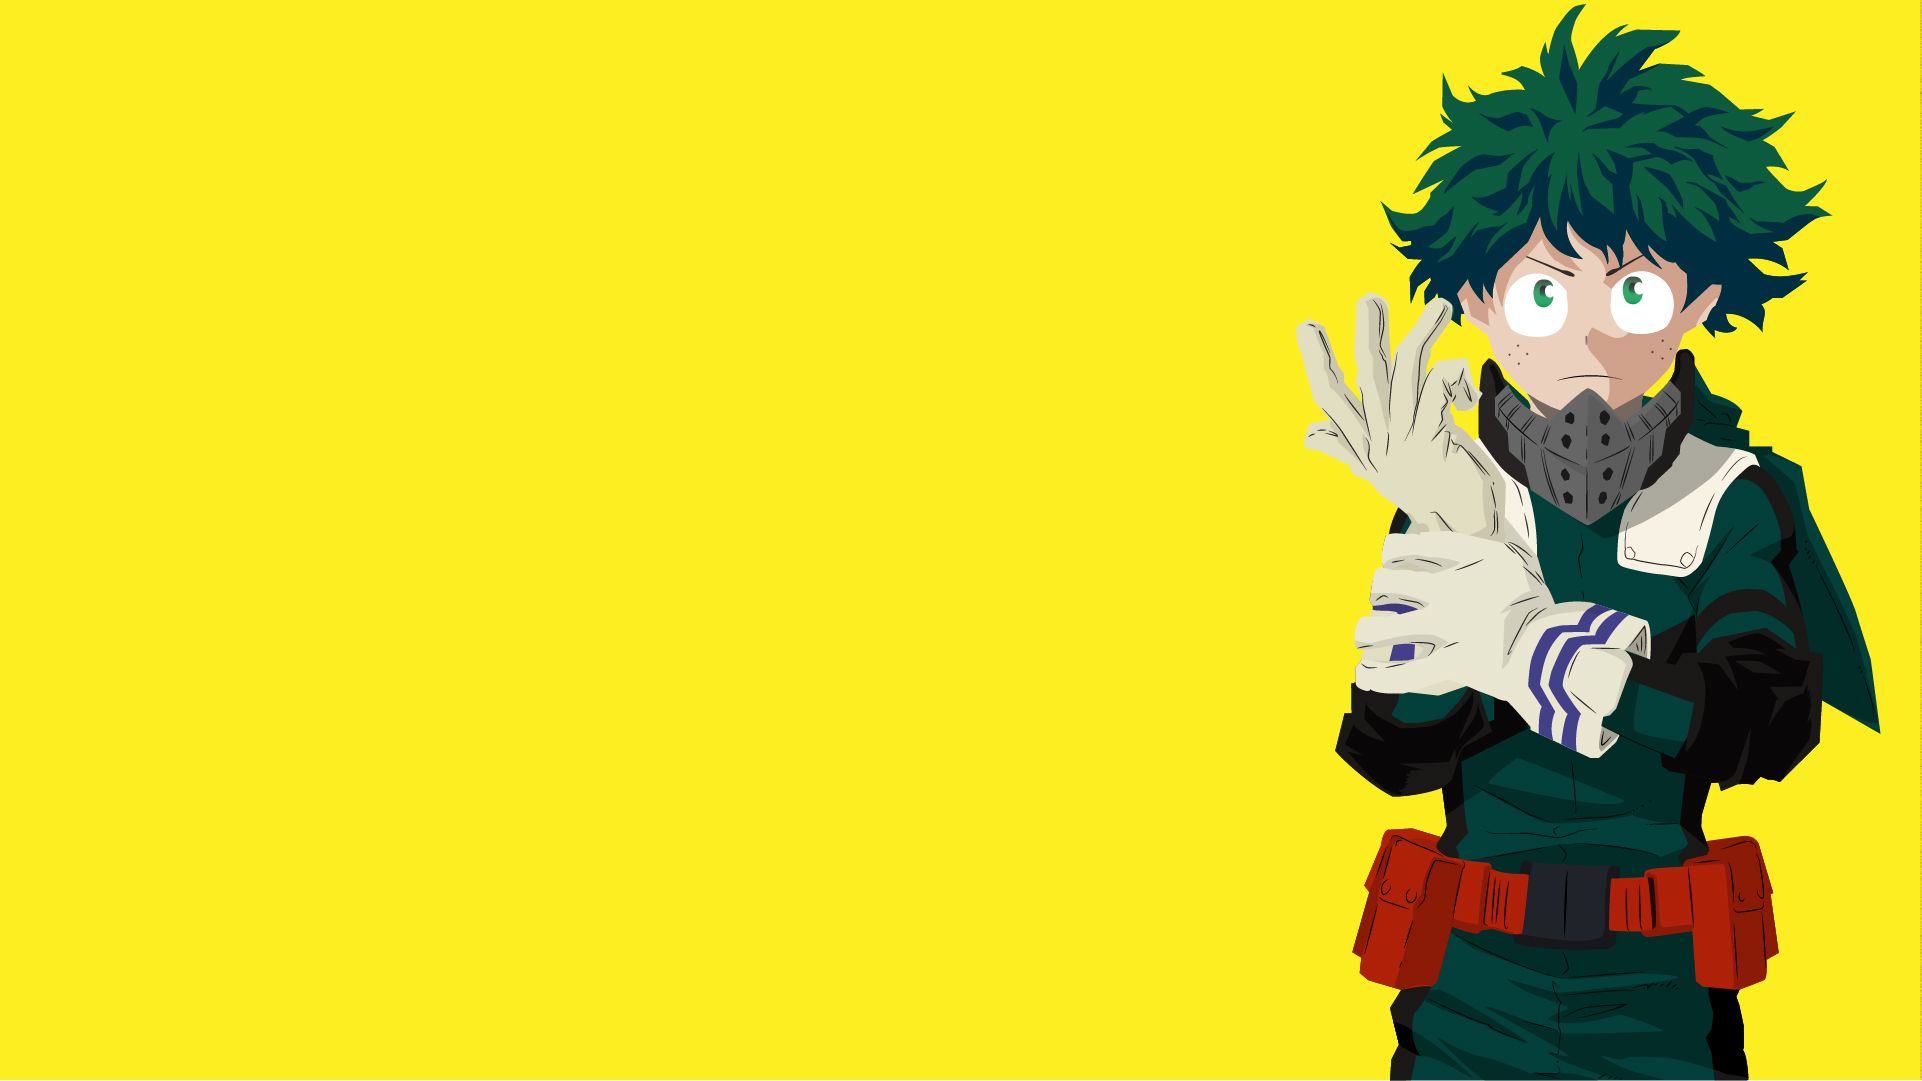 Deku Wallpaper. I made it in illustrator in about 12 hs, still learning. Hope you like it!